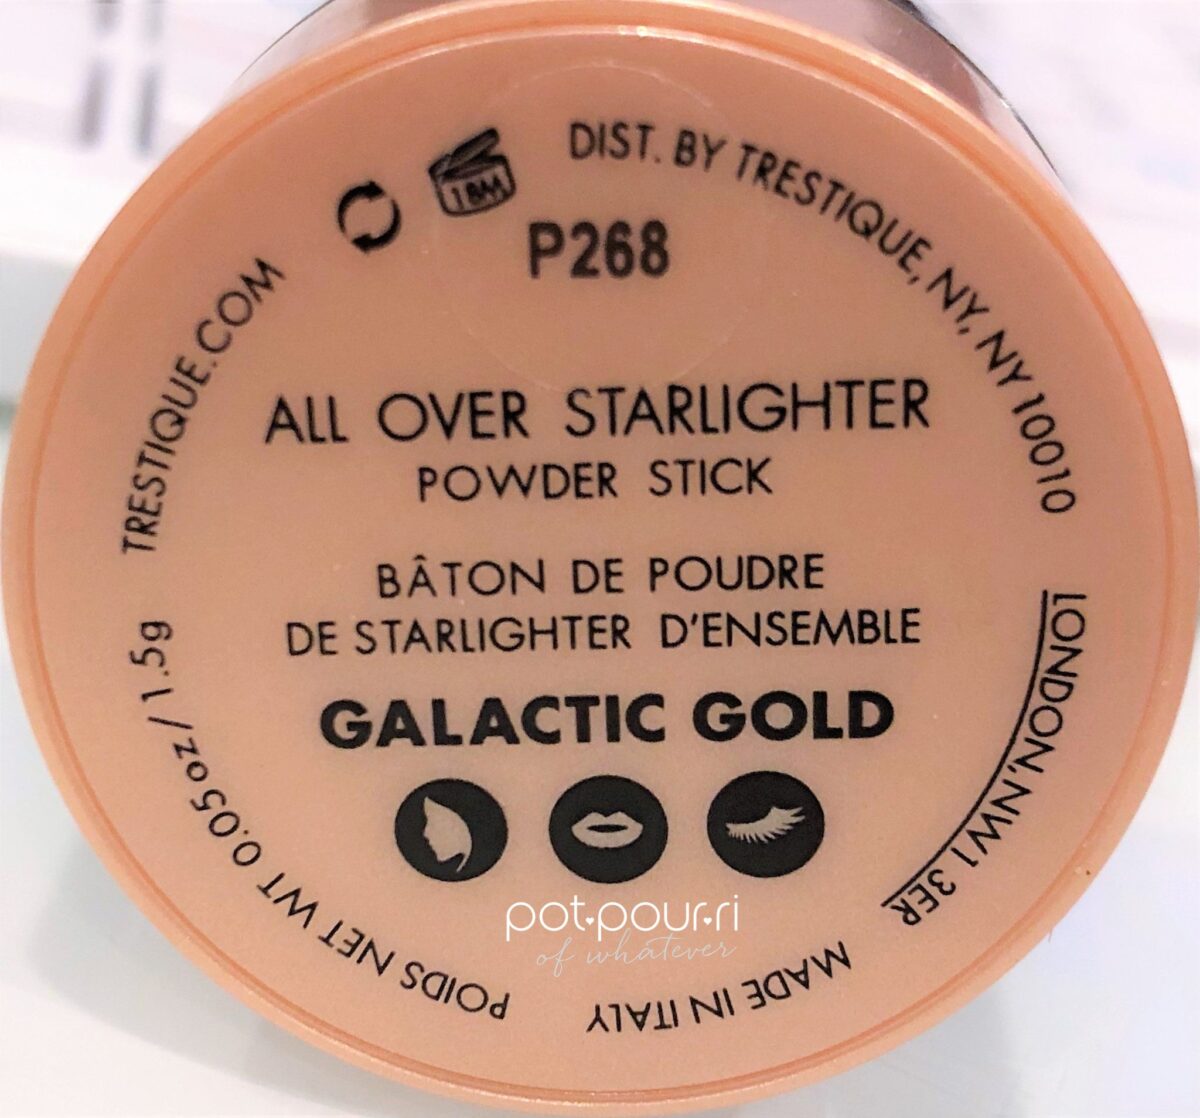 TRESTIQUE ALL OVER STARLIGHTER IN GALACTIC GOLD